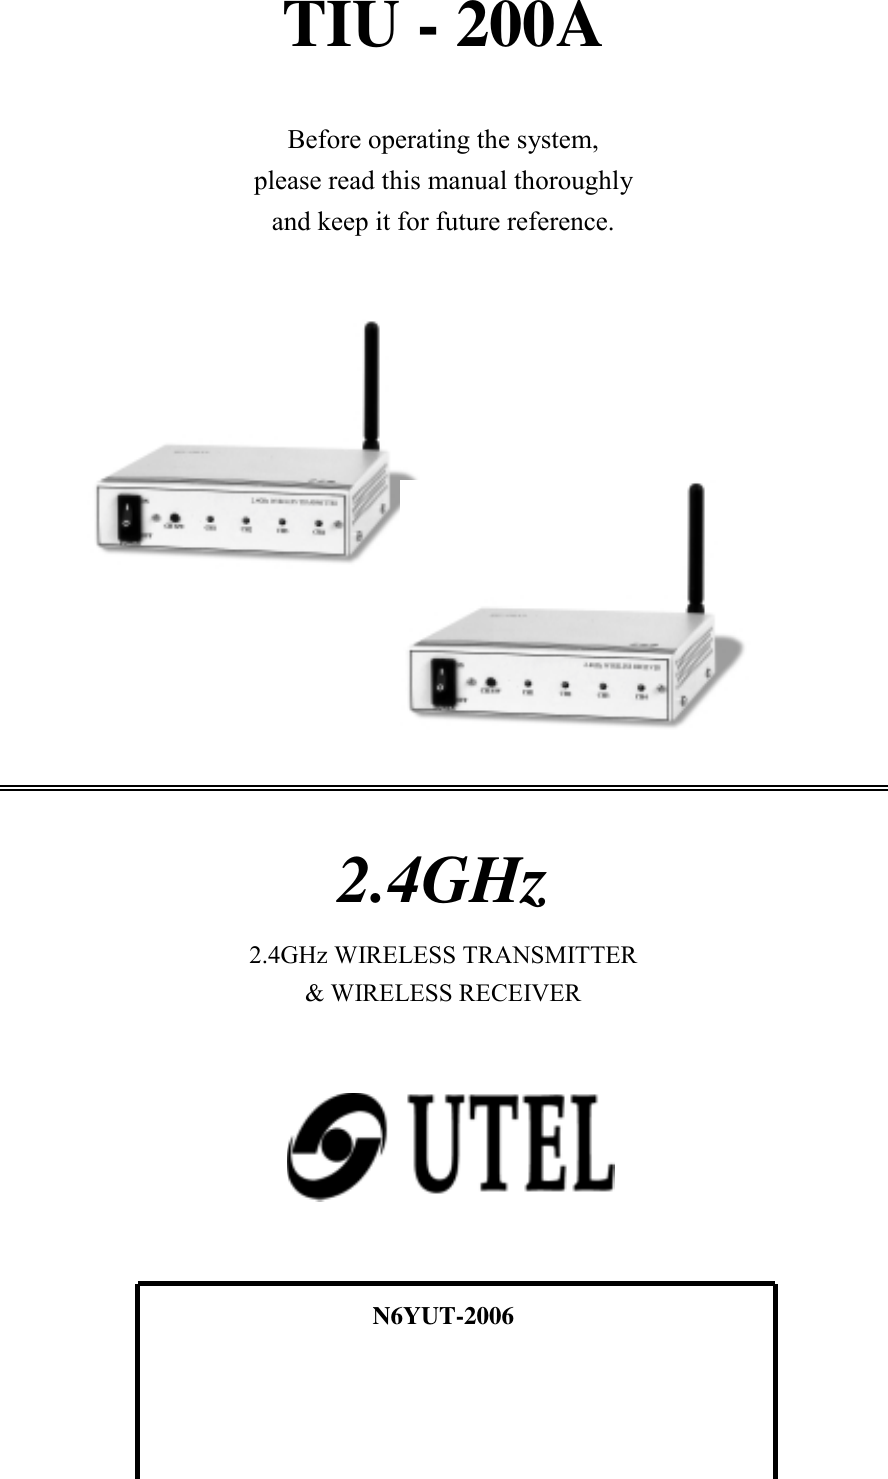 TIU - 200ABefore operating the system,please read this manual thoroughlyand keep it for future reference.2.4GHz2.4GHz WIRELESS TRANSMITTER&amp; WIRELESS RECEIVERN6YUT-2006